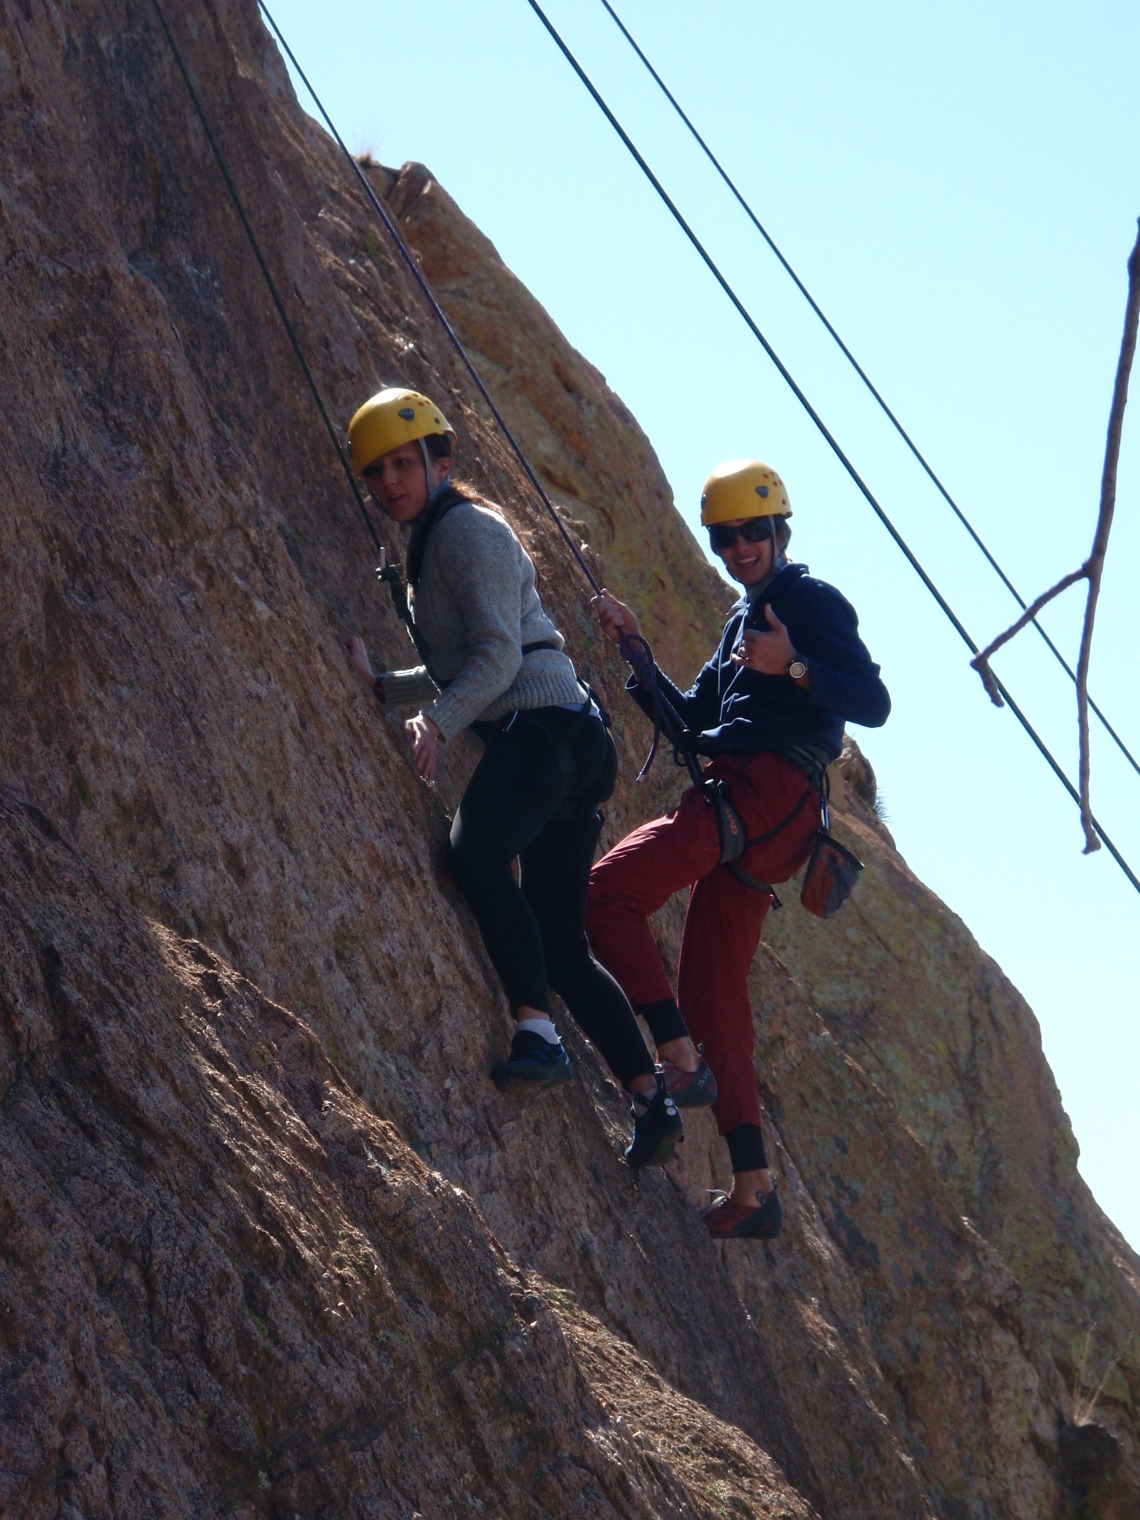 Two climbers giving thumbs up for photo while climbing